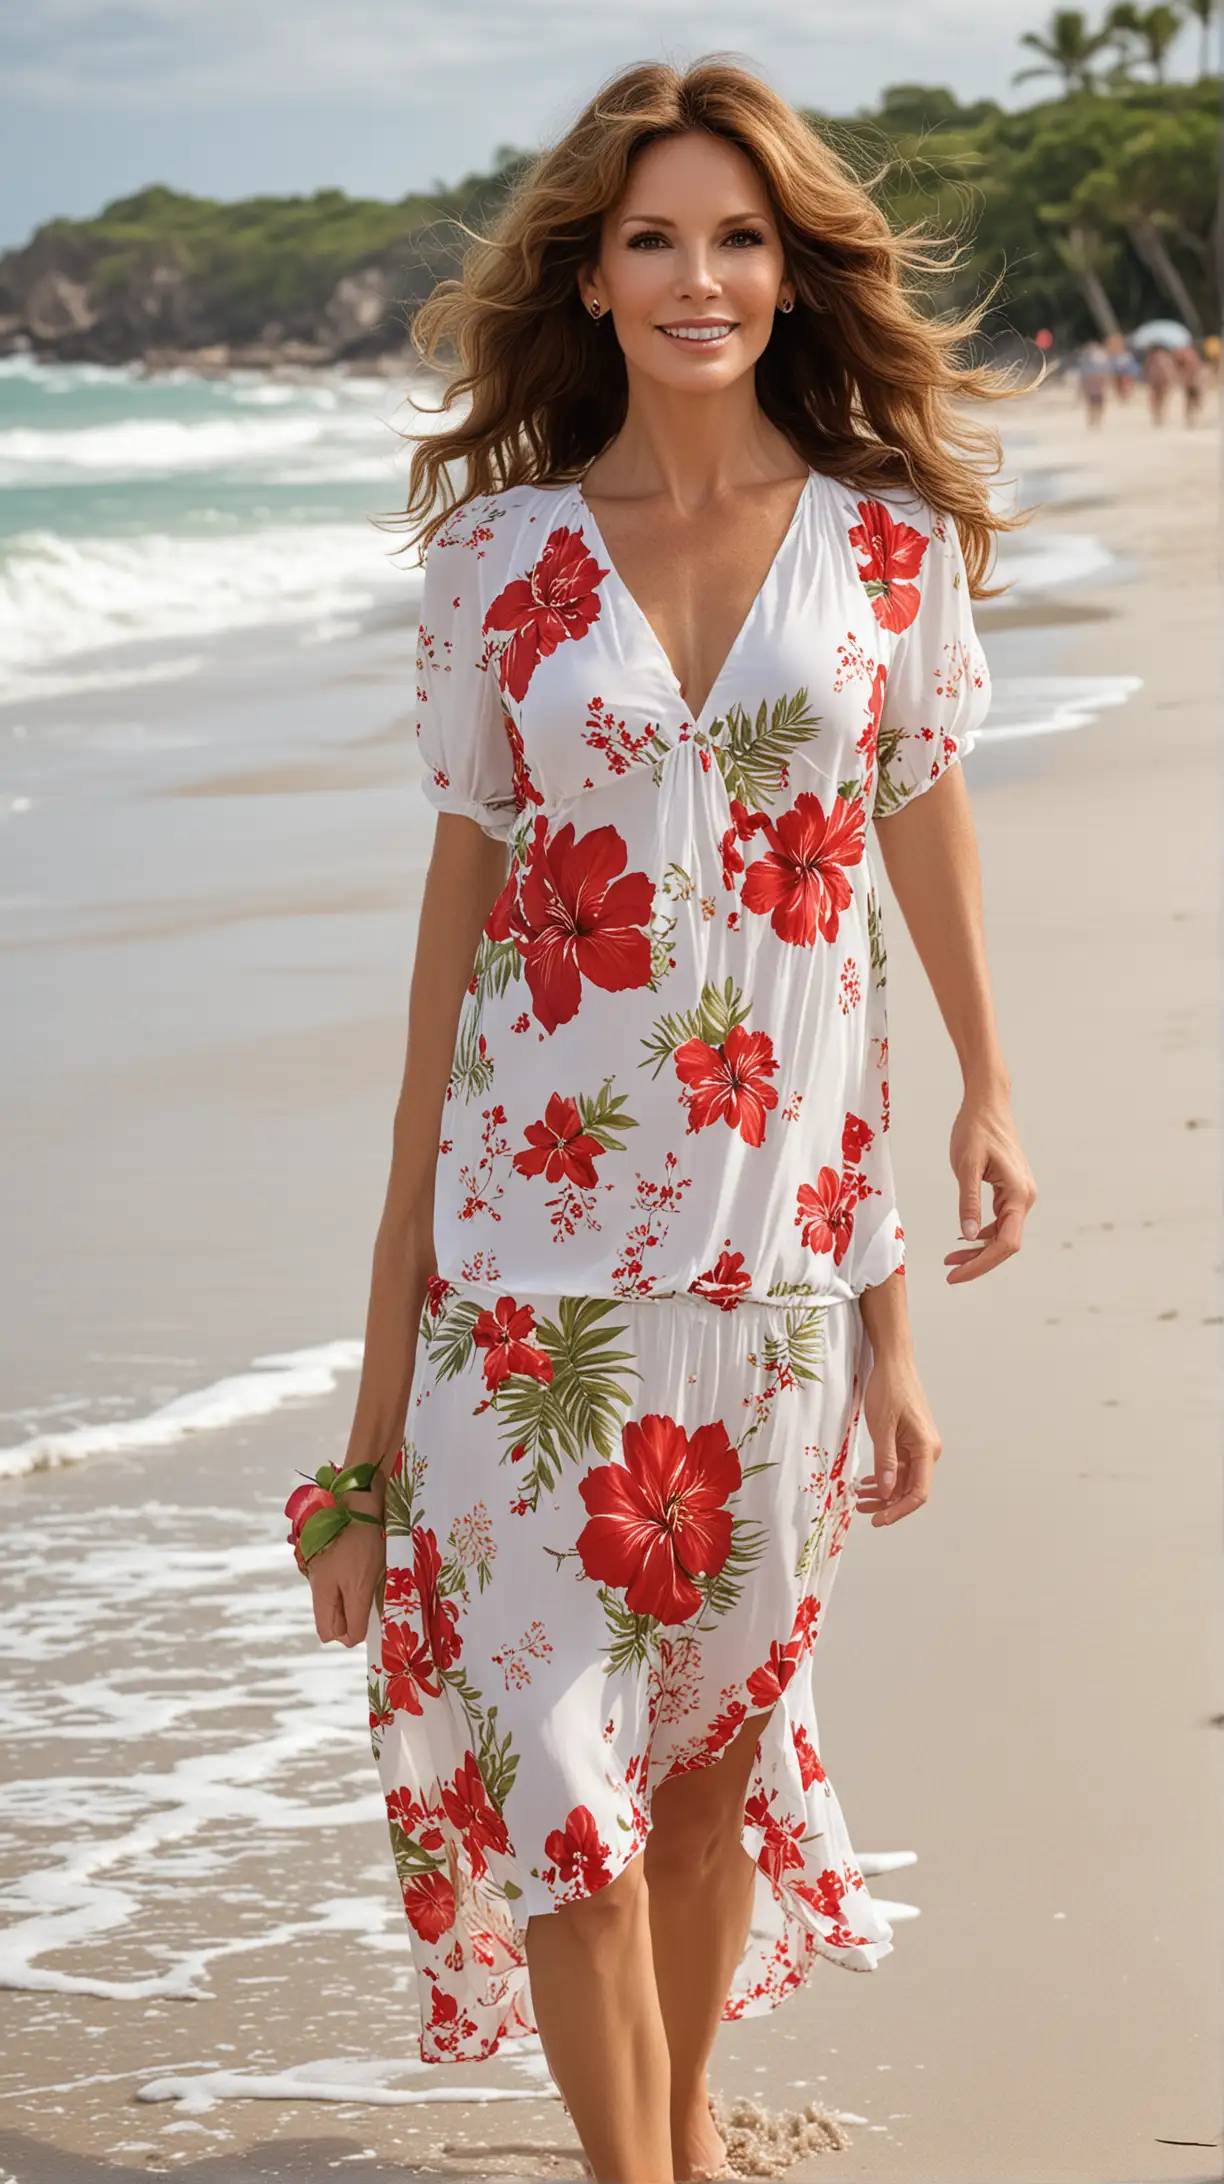 Slim and Chic Jaclyn Smith in White Tropical Dress with Red Flower at Beach